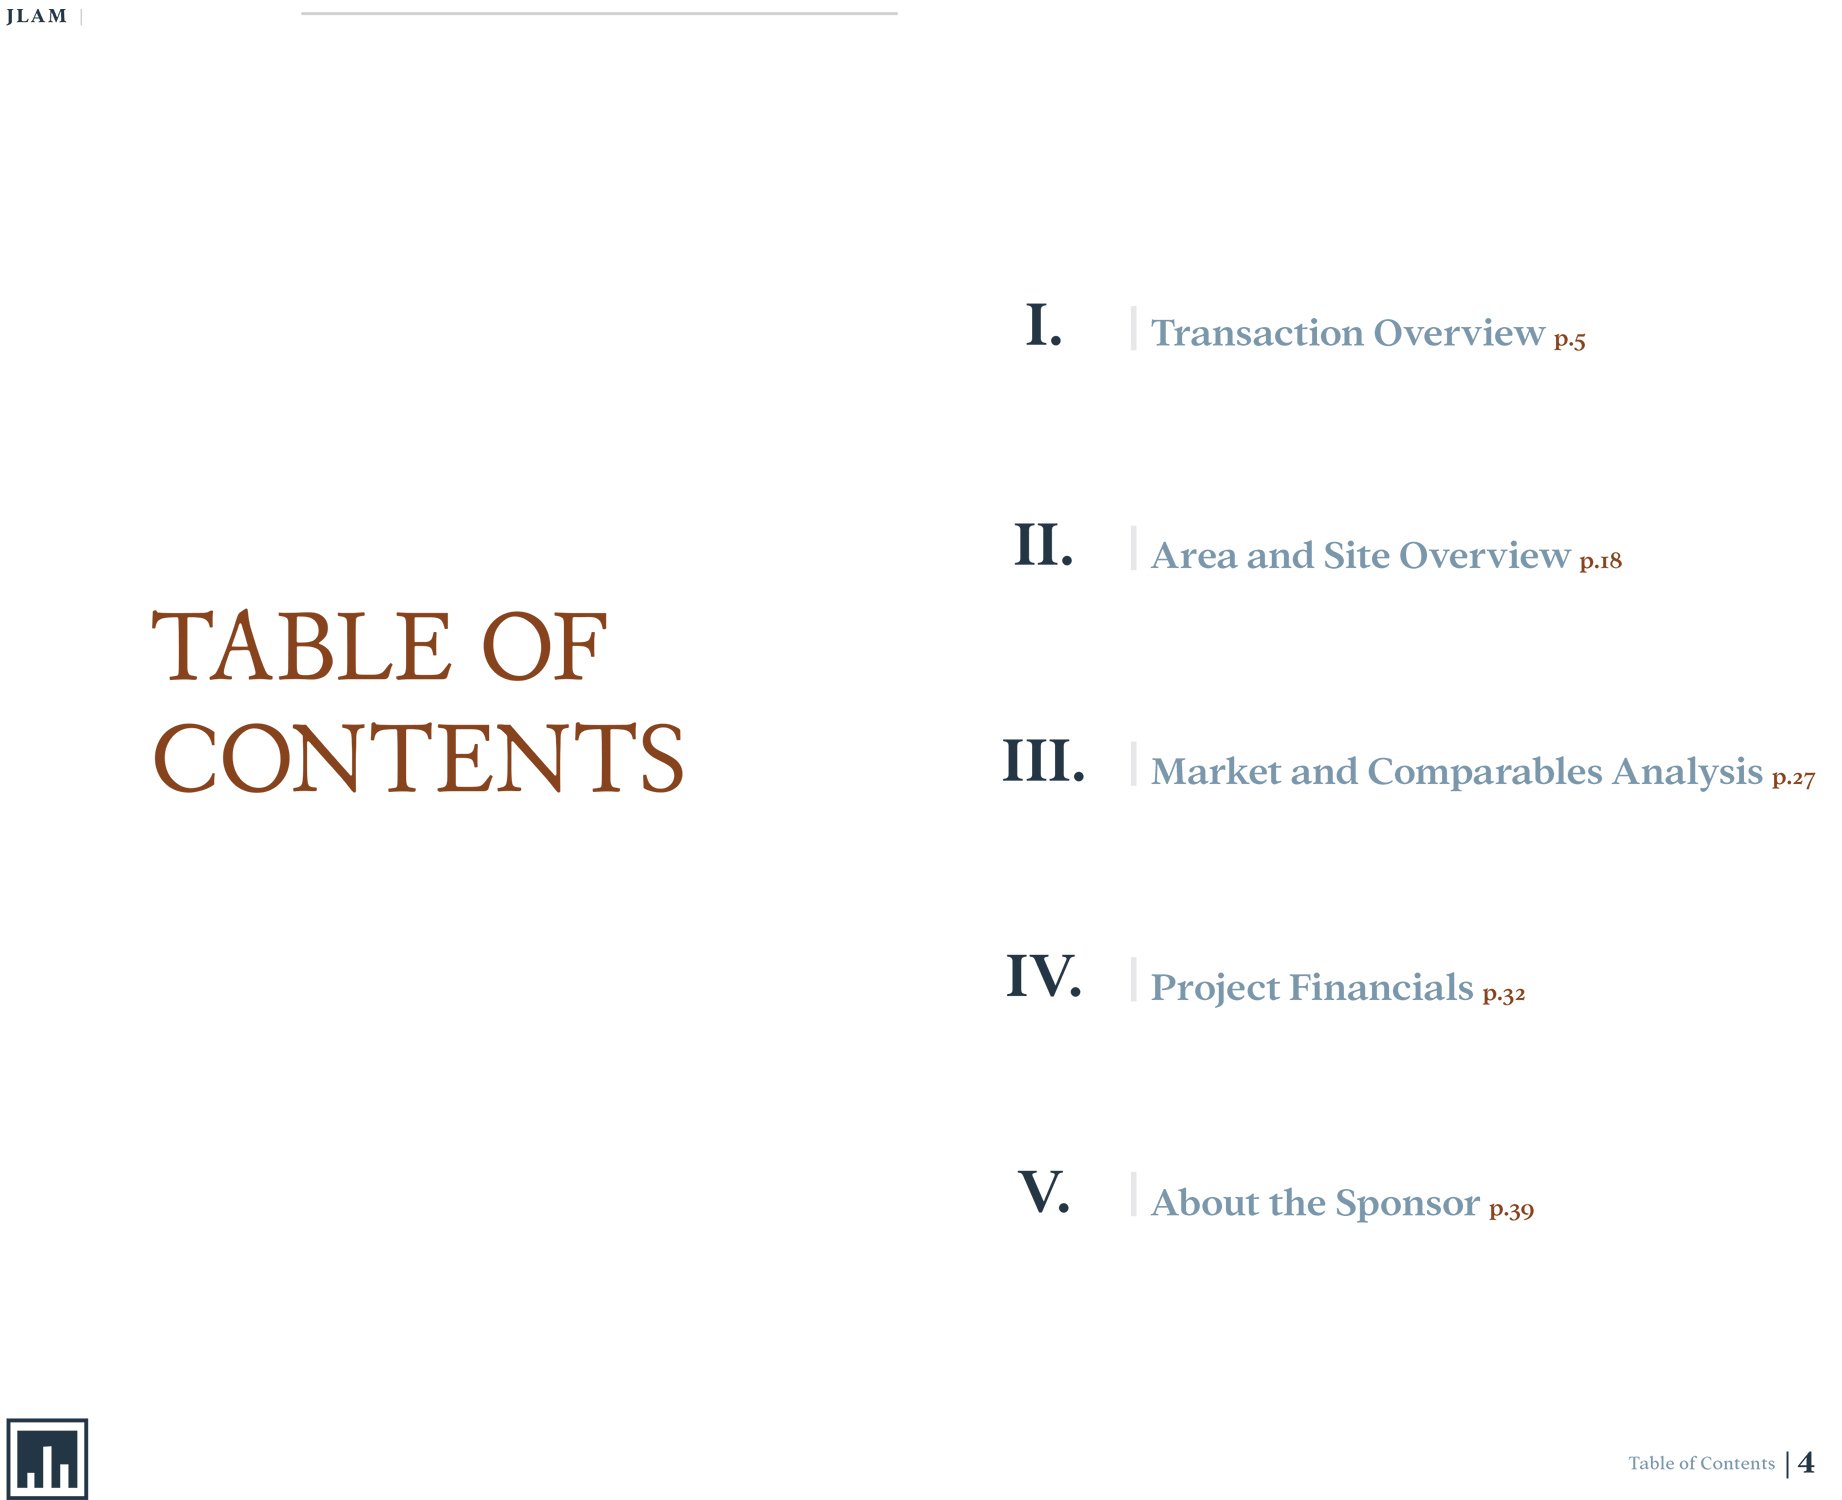 JLAM Investment Book Table of Contents